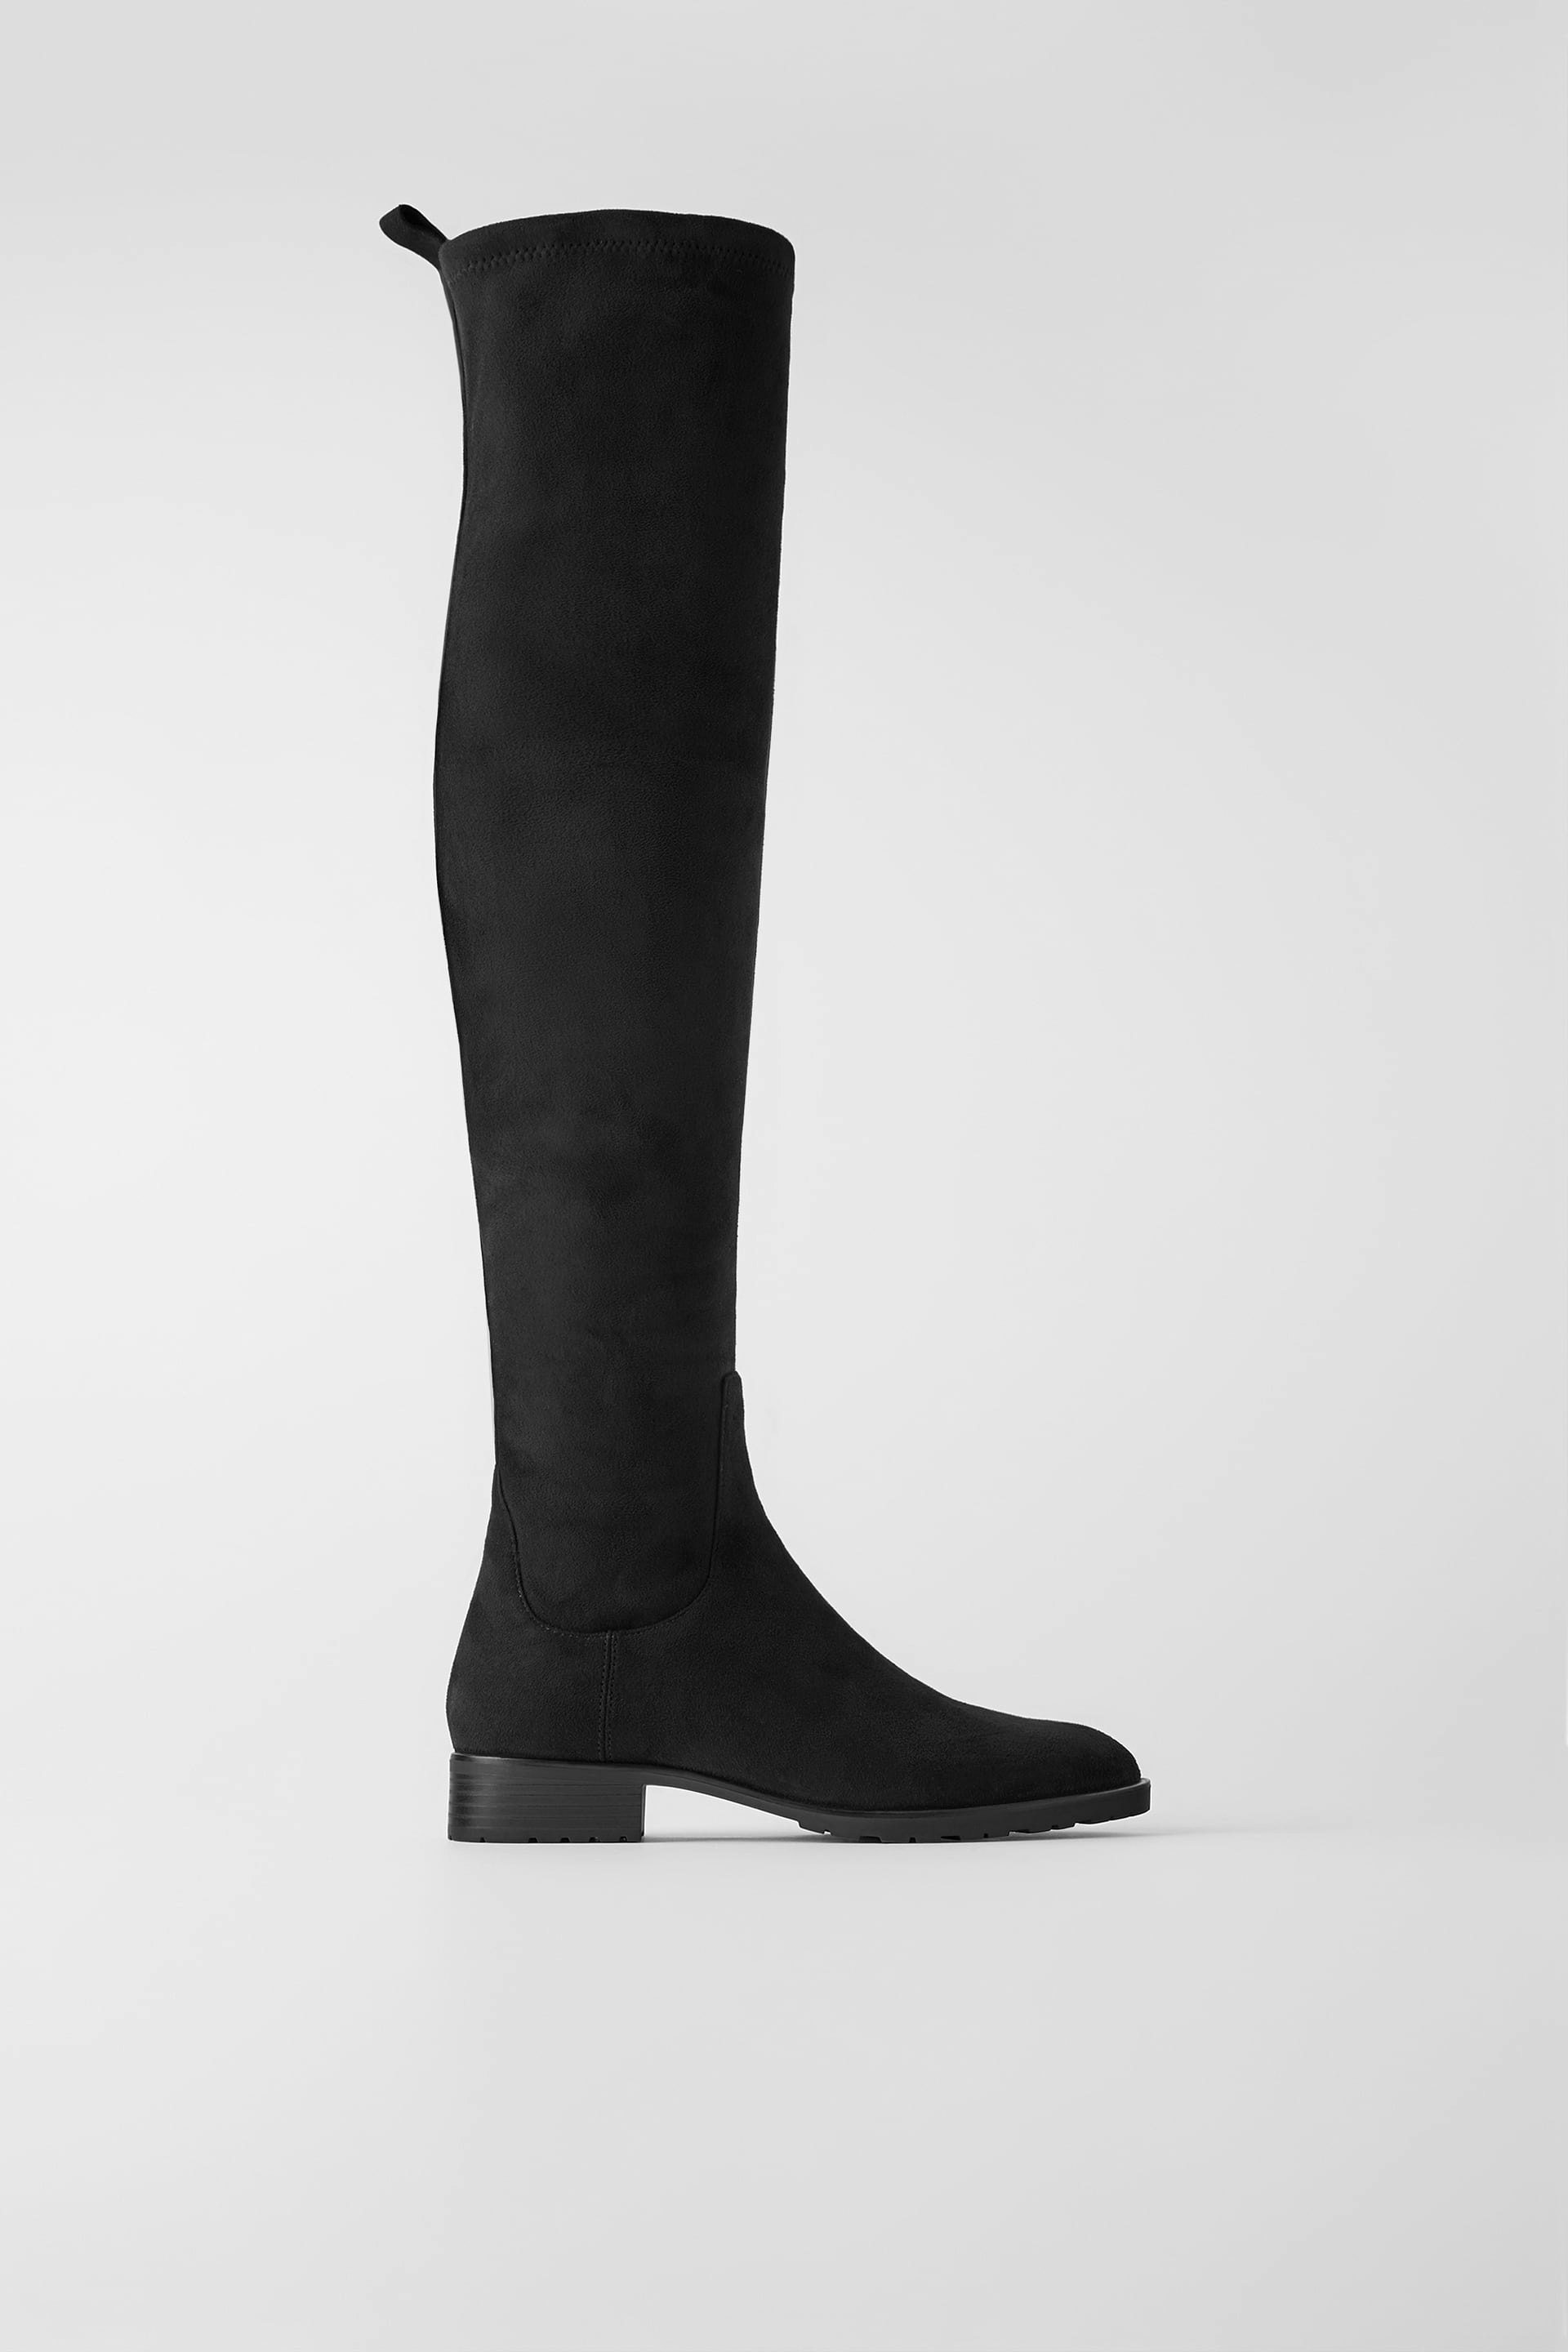 best thigh high boots that stay up